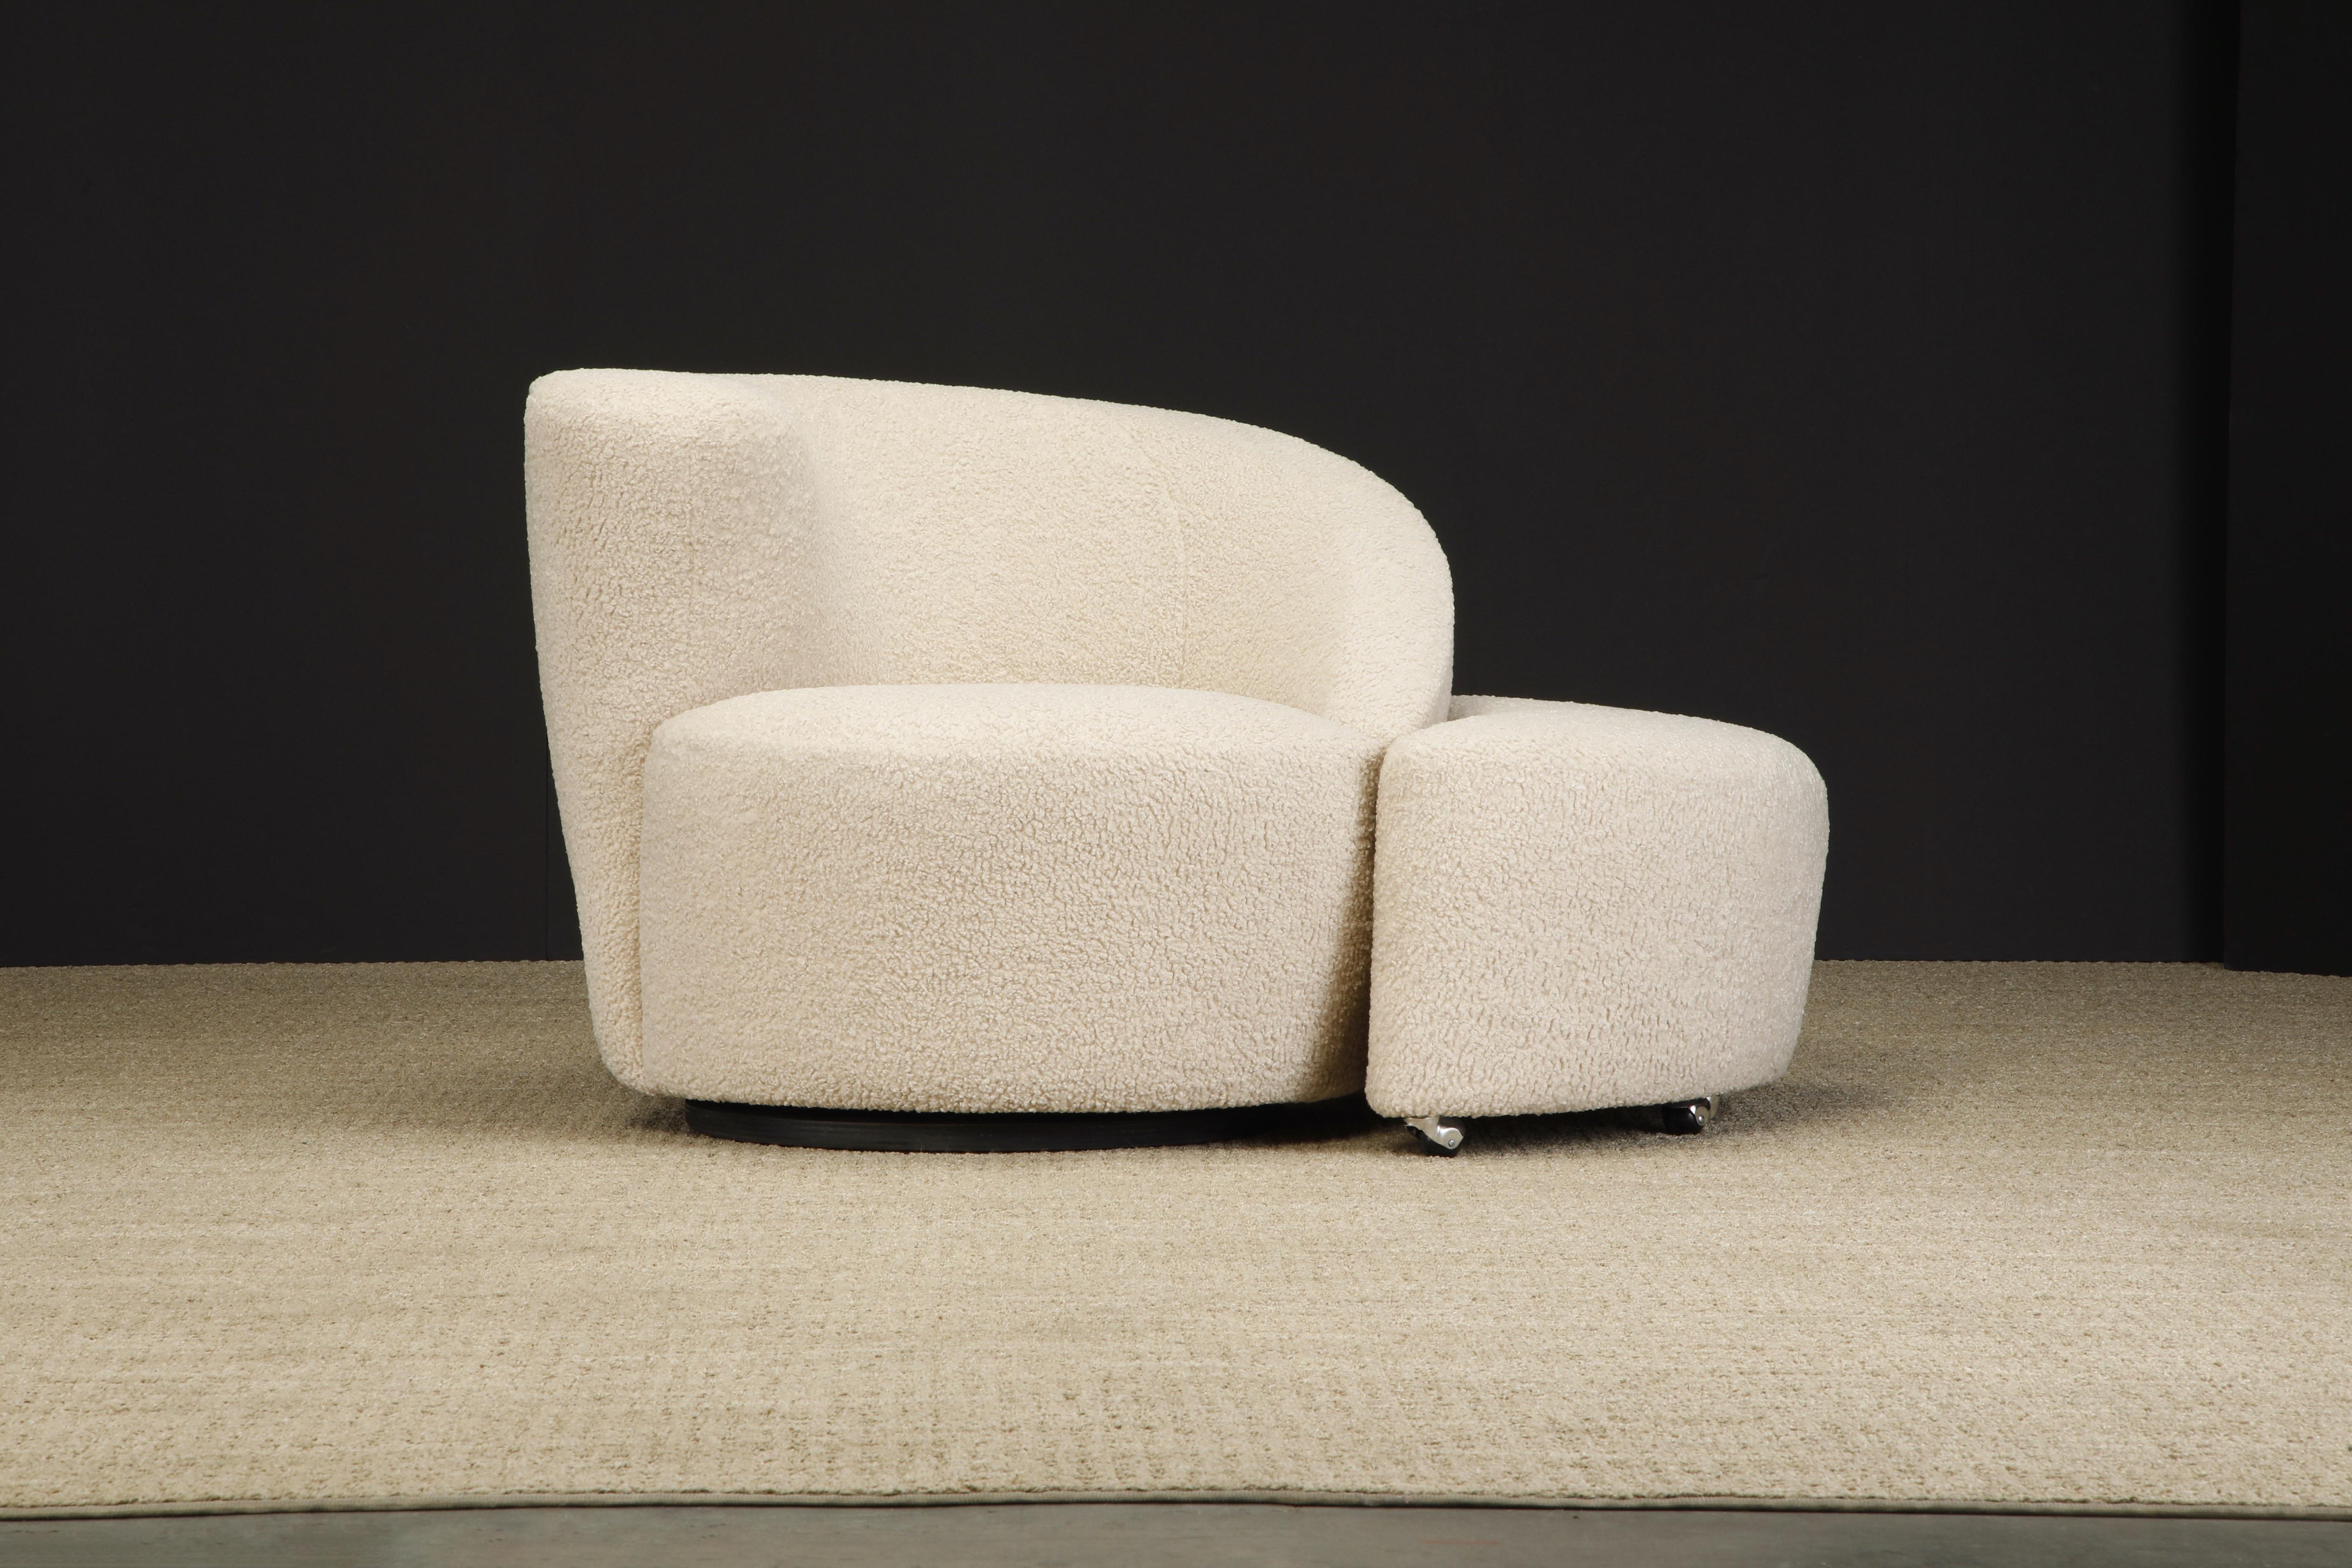 Late 20th Century 'Corkscrew' Chair & Ottoman by Vladimir Kagan for Directional in Bouclé, Signed